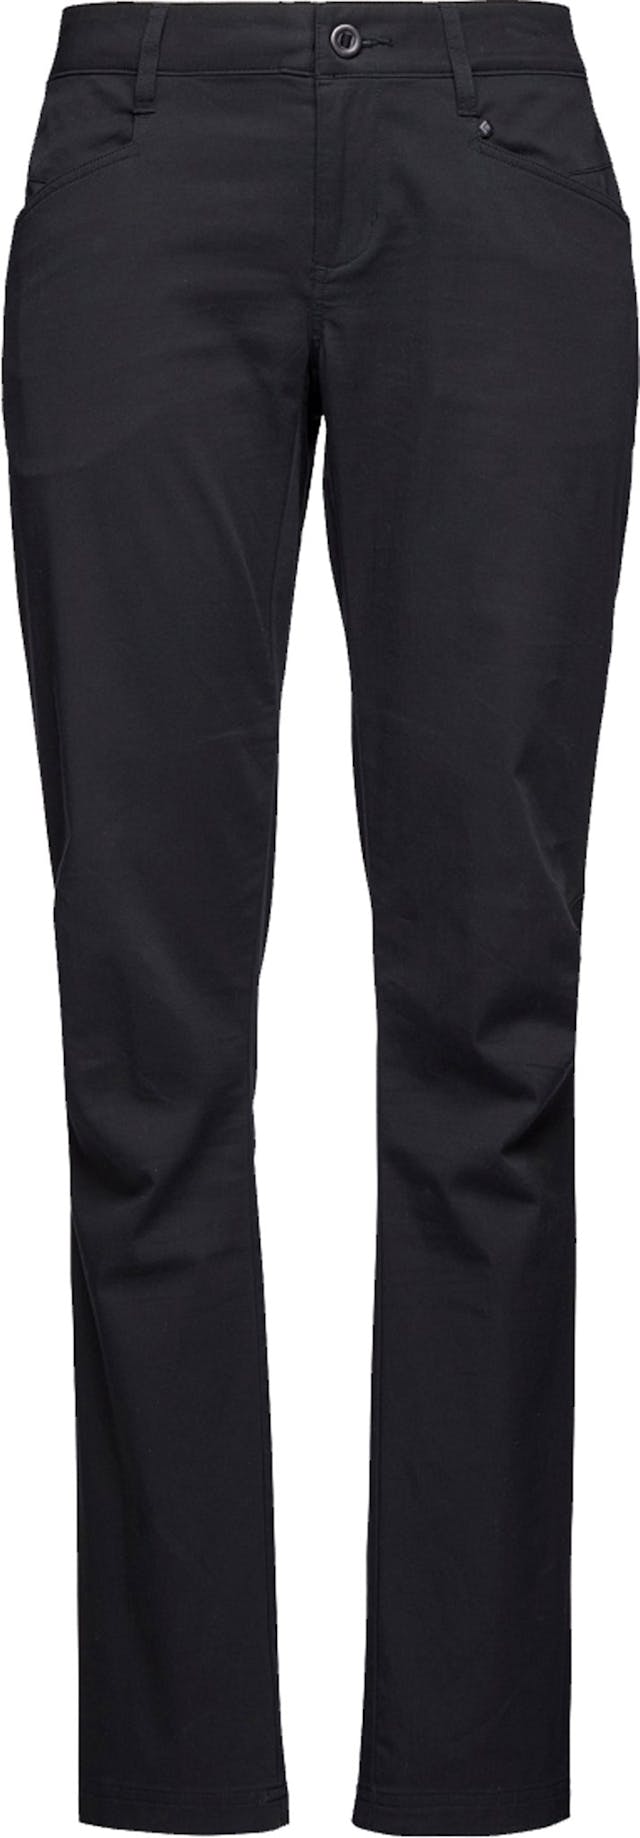 Product image for Notion SL Pants - Women's